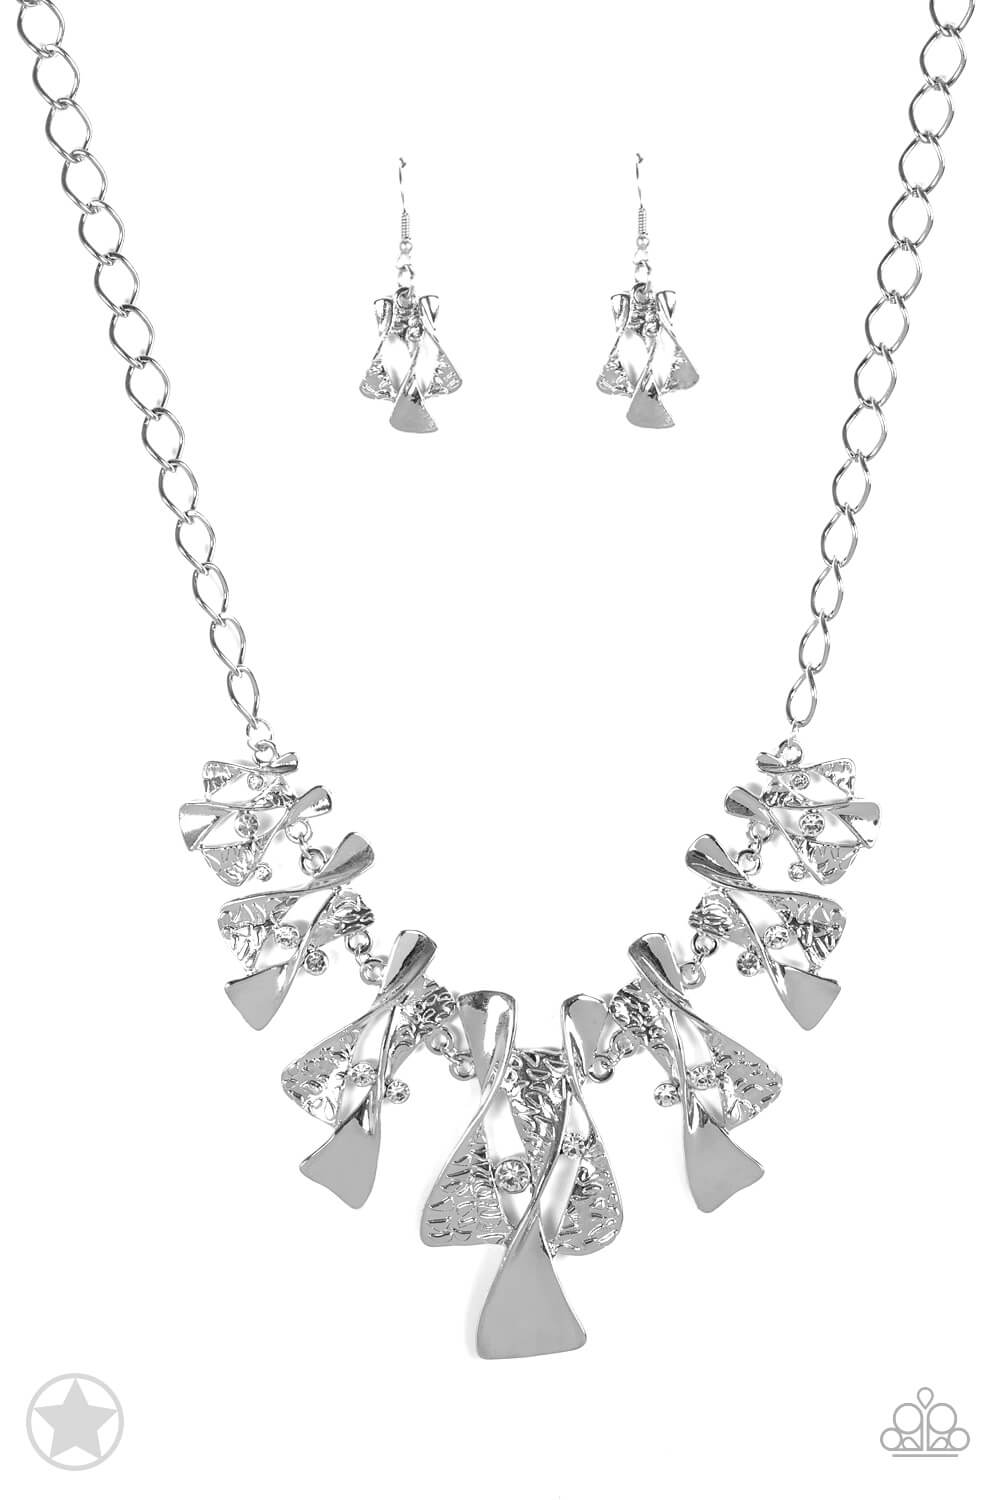 The Sands of Time Silver Necklace Set - Princess Glam Shop